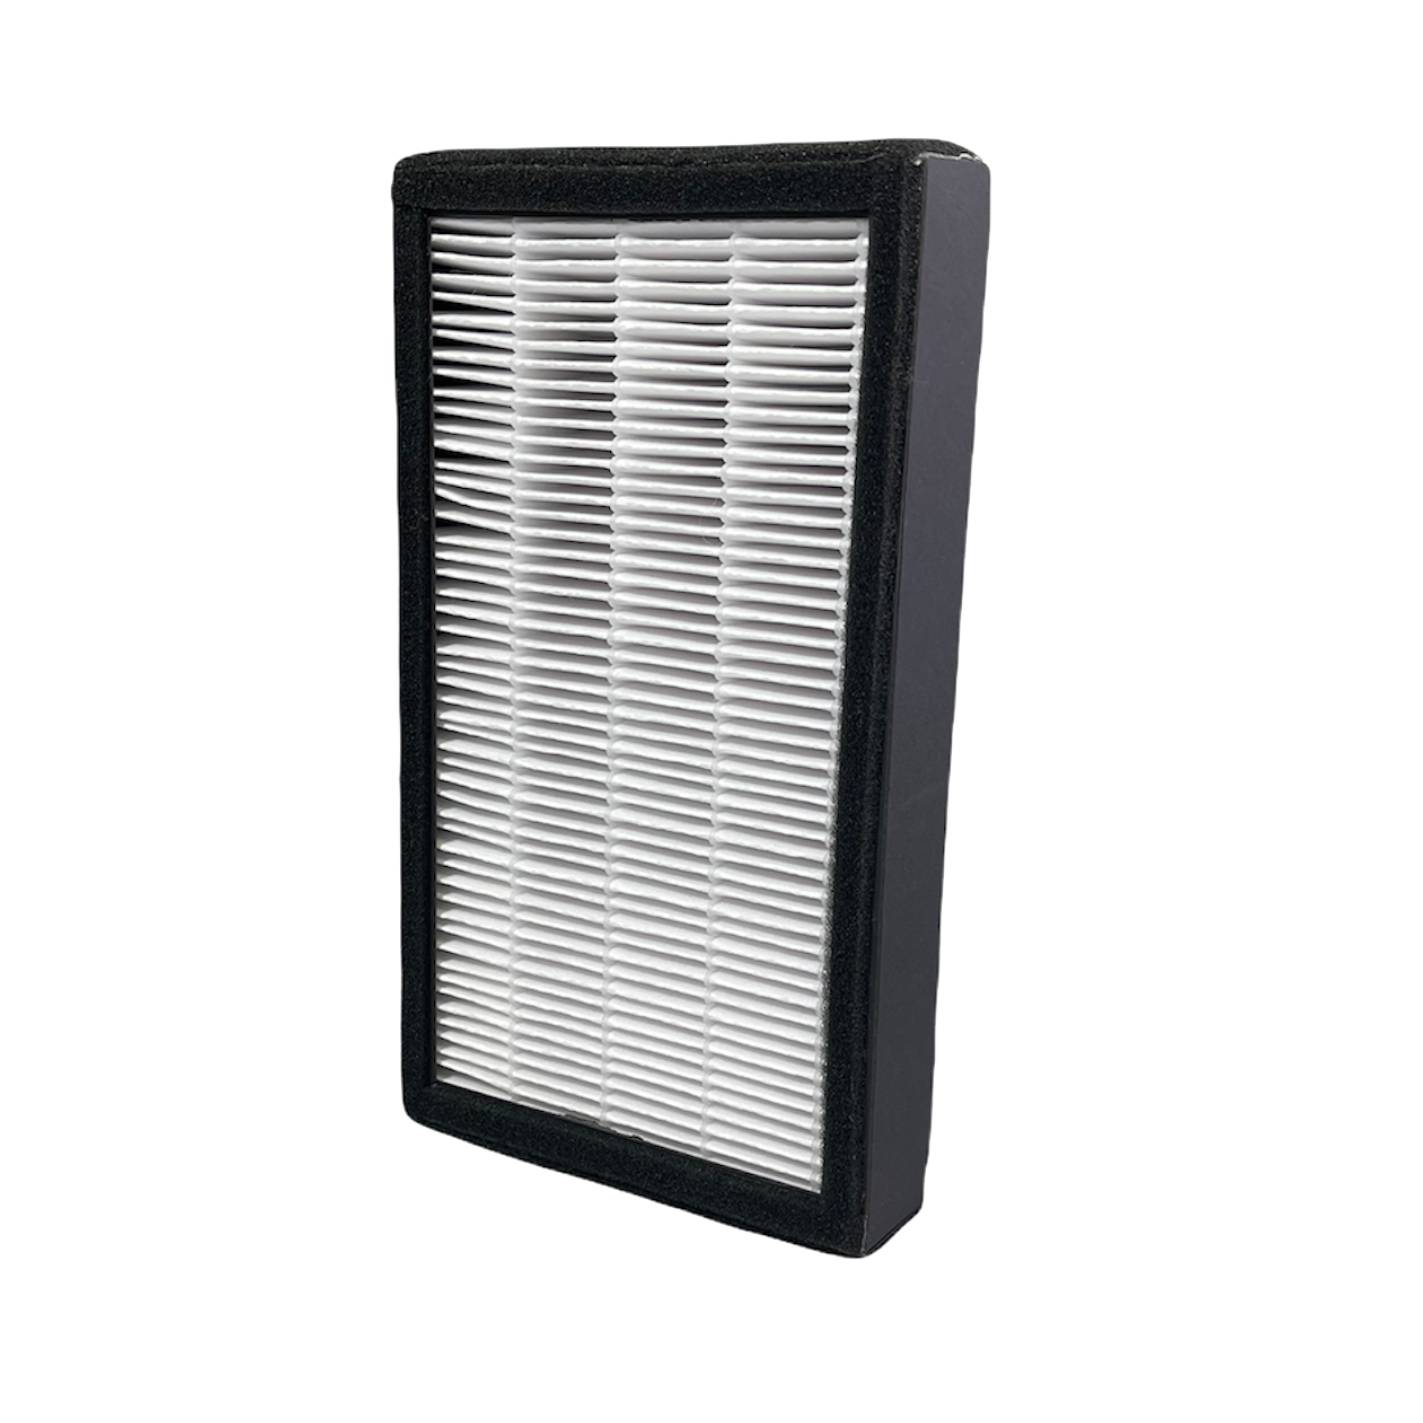 Filters Fast&reg; Replacement for GermGuardian FLT4100 HEPA Replacement Filter E